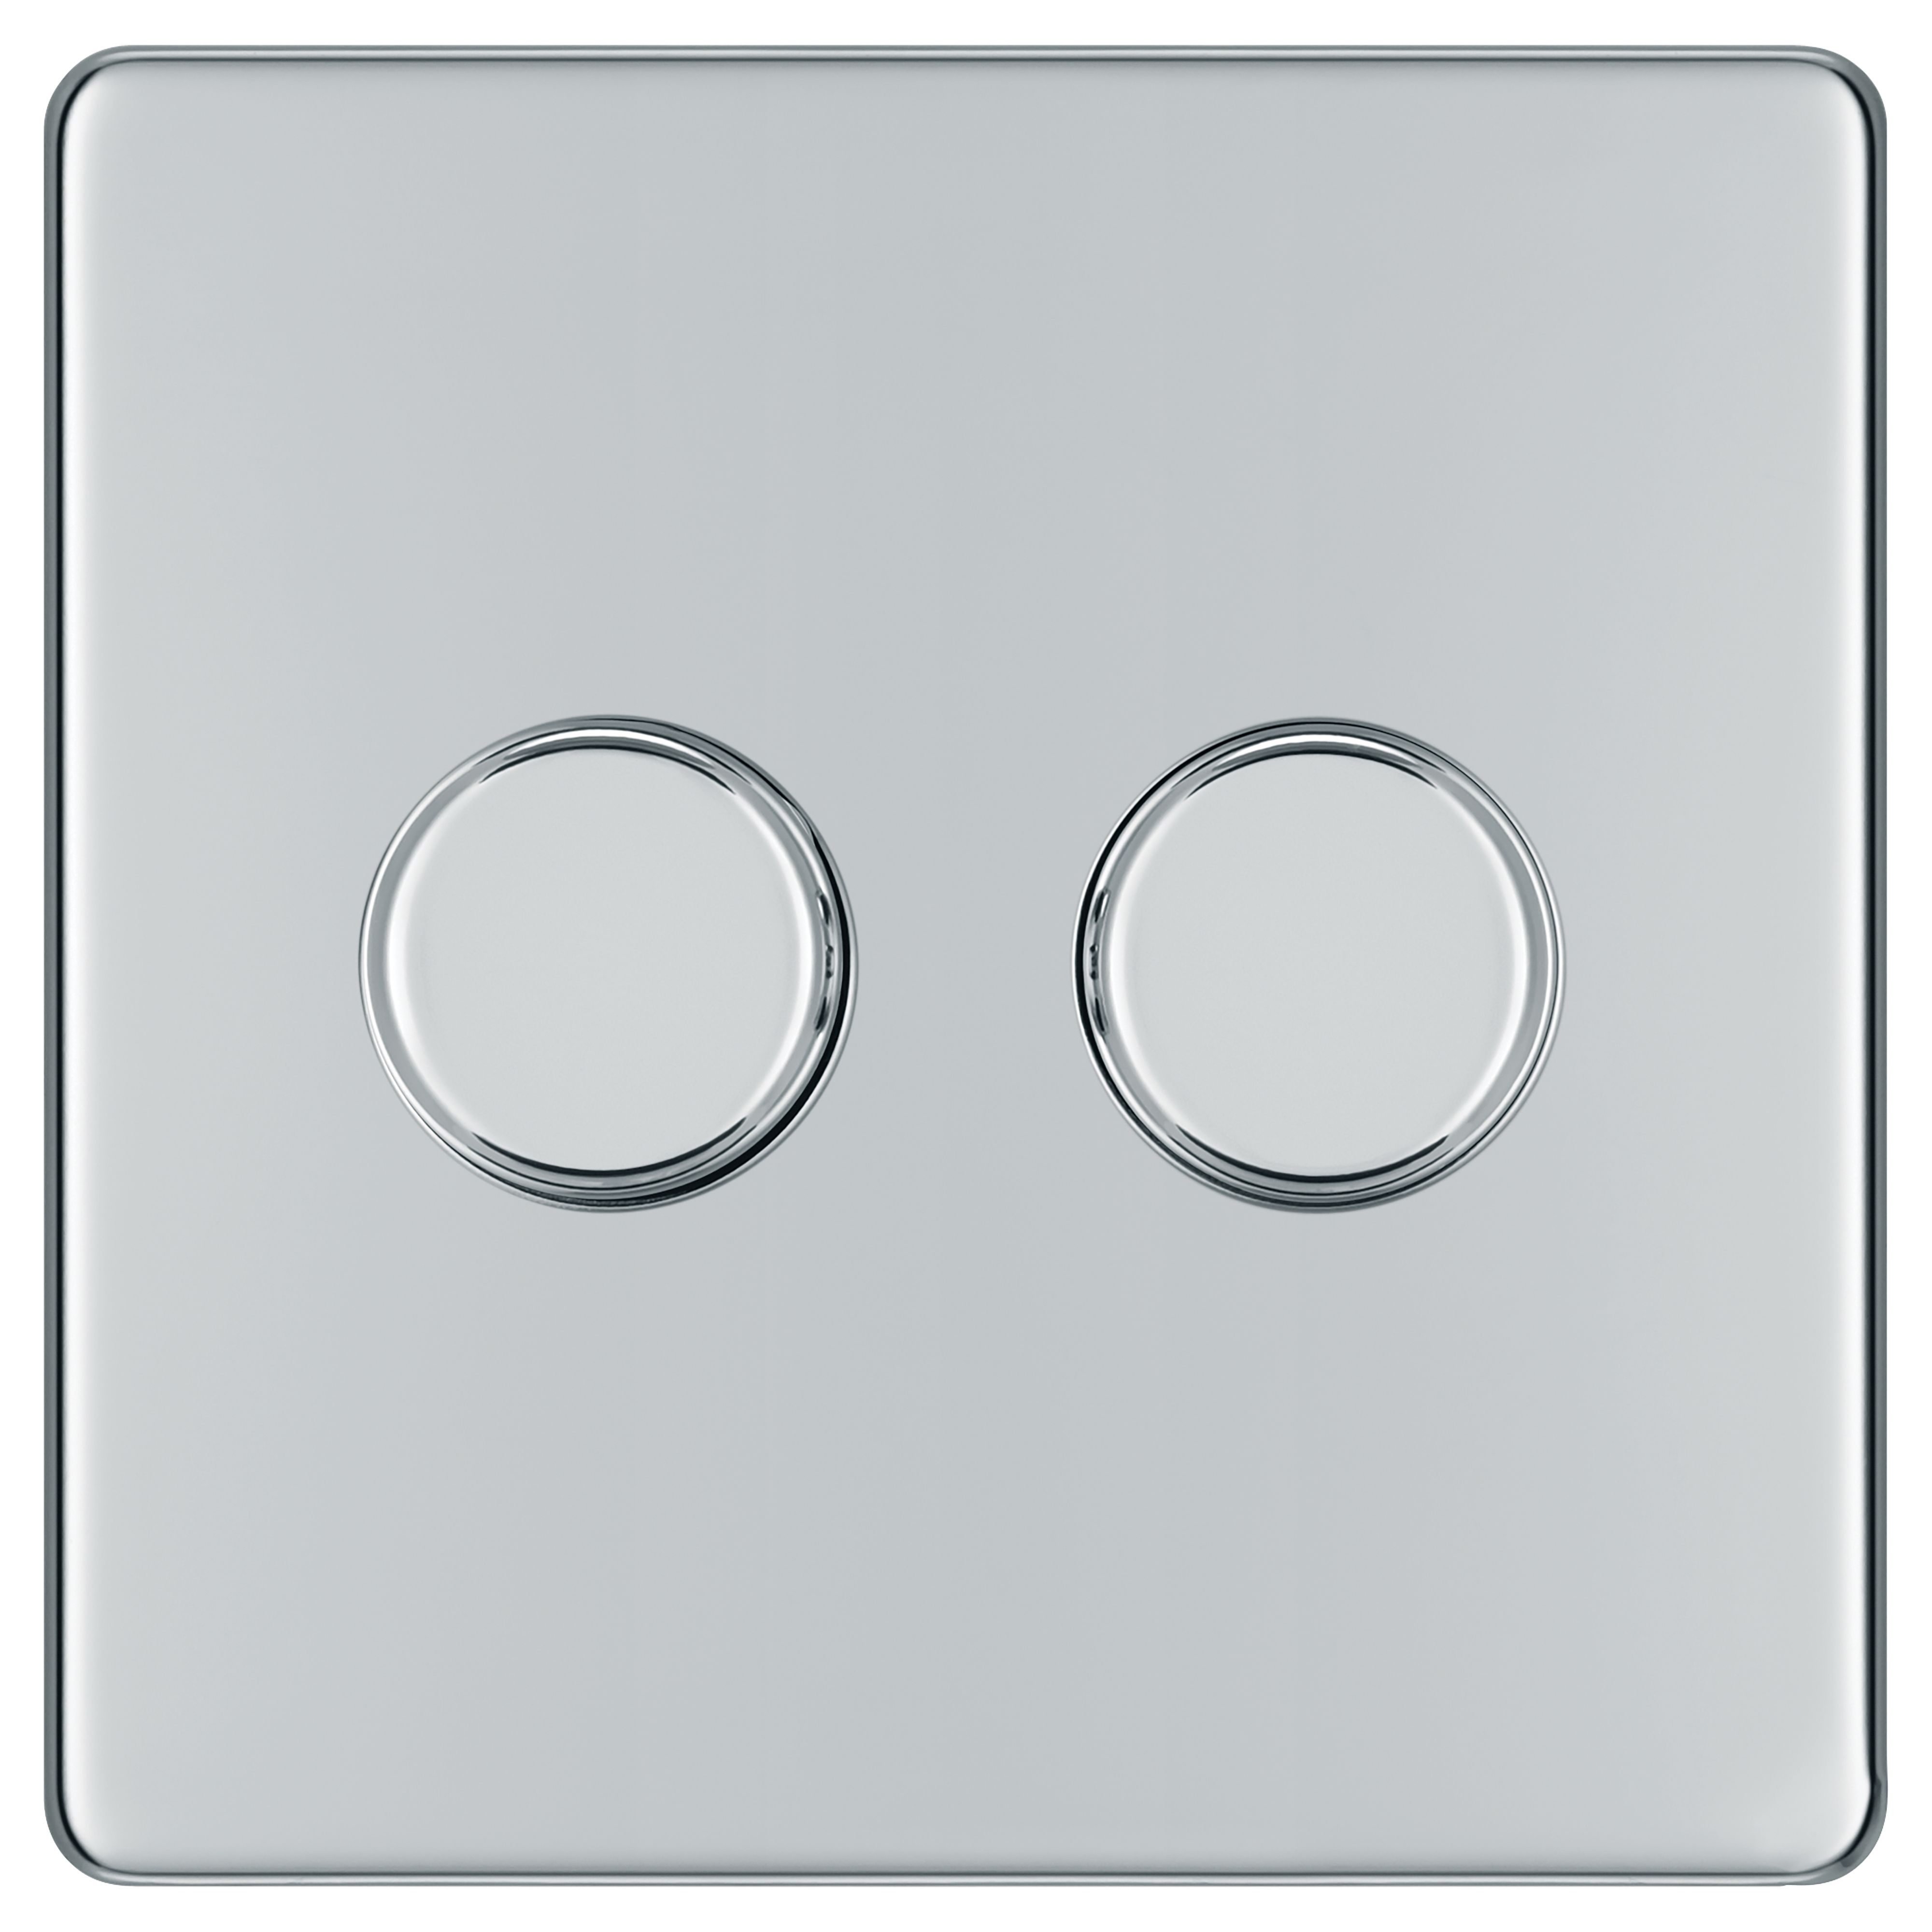 BG 400W Screwless Flat Plate Double Dimmer Switch, 2-Way Push On/Off - Polished Chrome